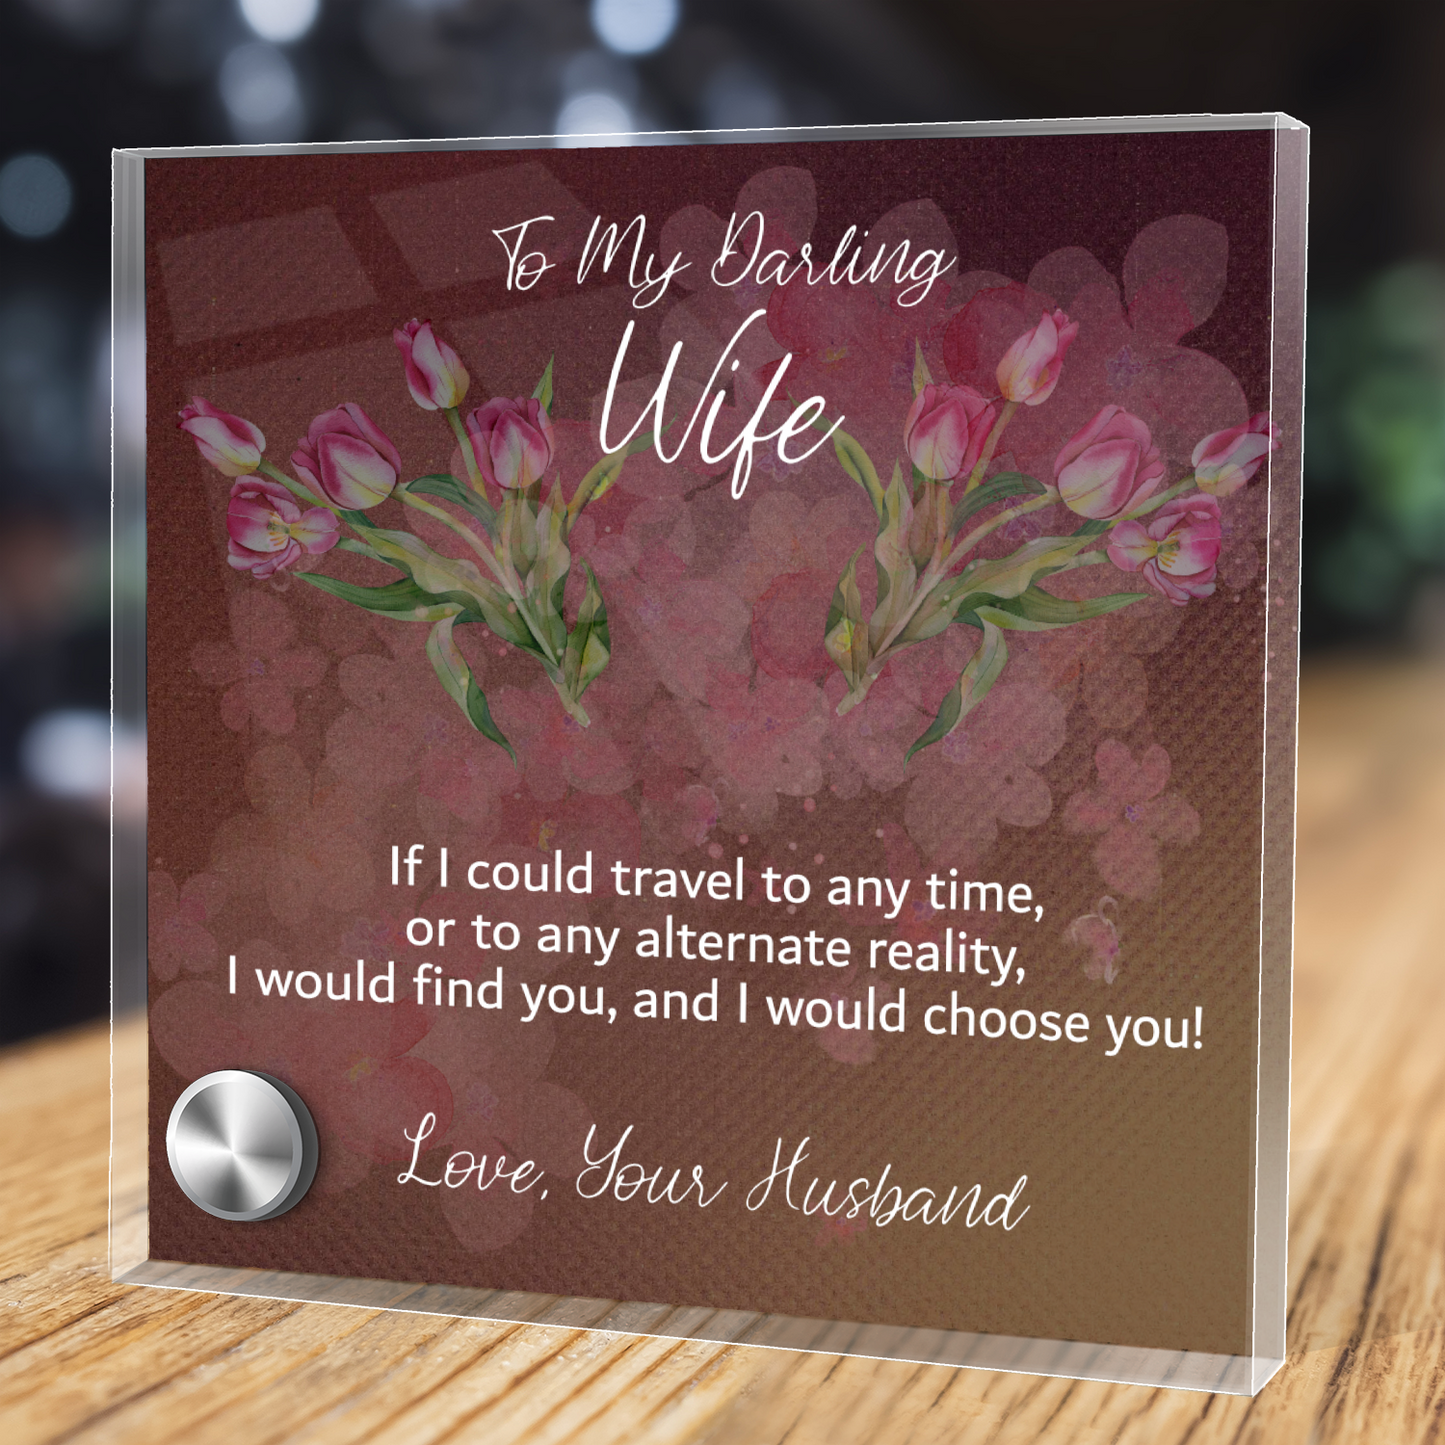 To My Darling Wife , Valentines Day Gift, Lumen Glass Message Display Jewelry Stand